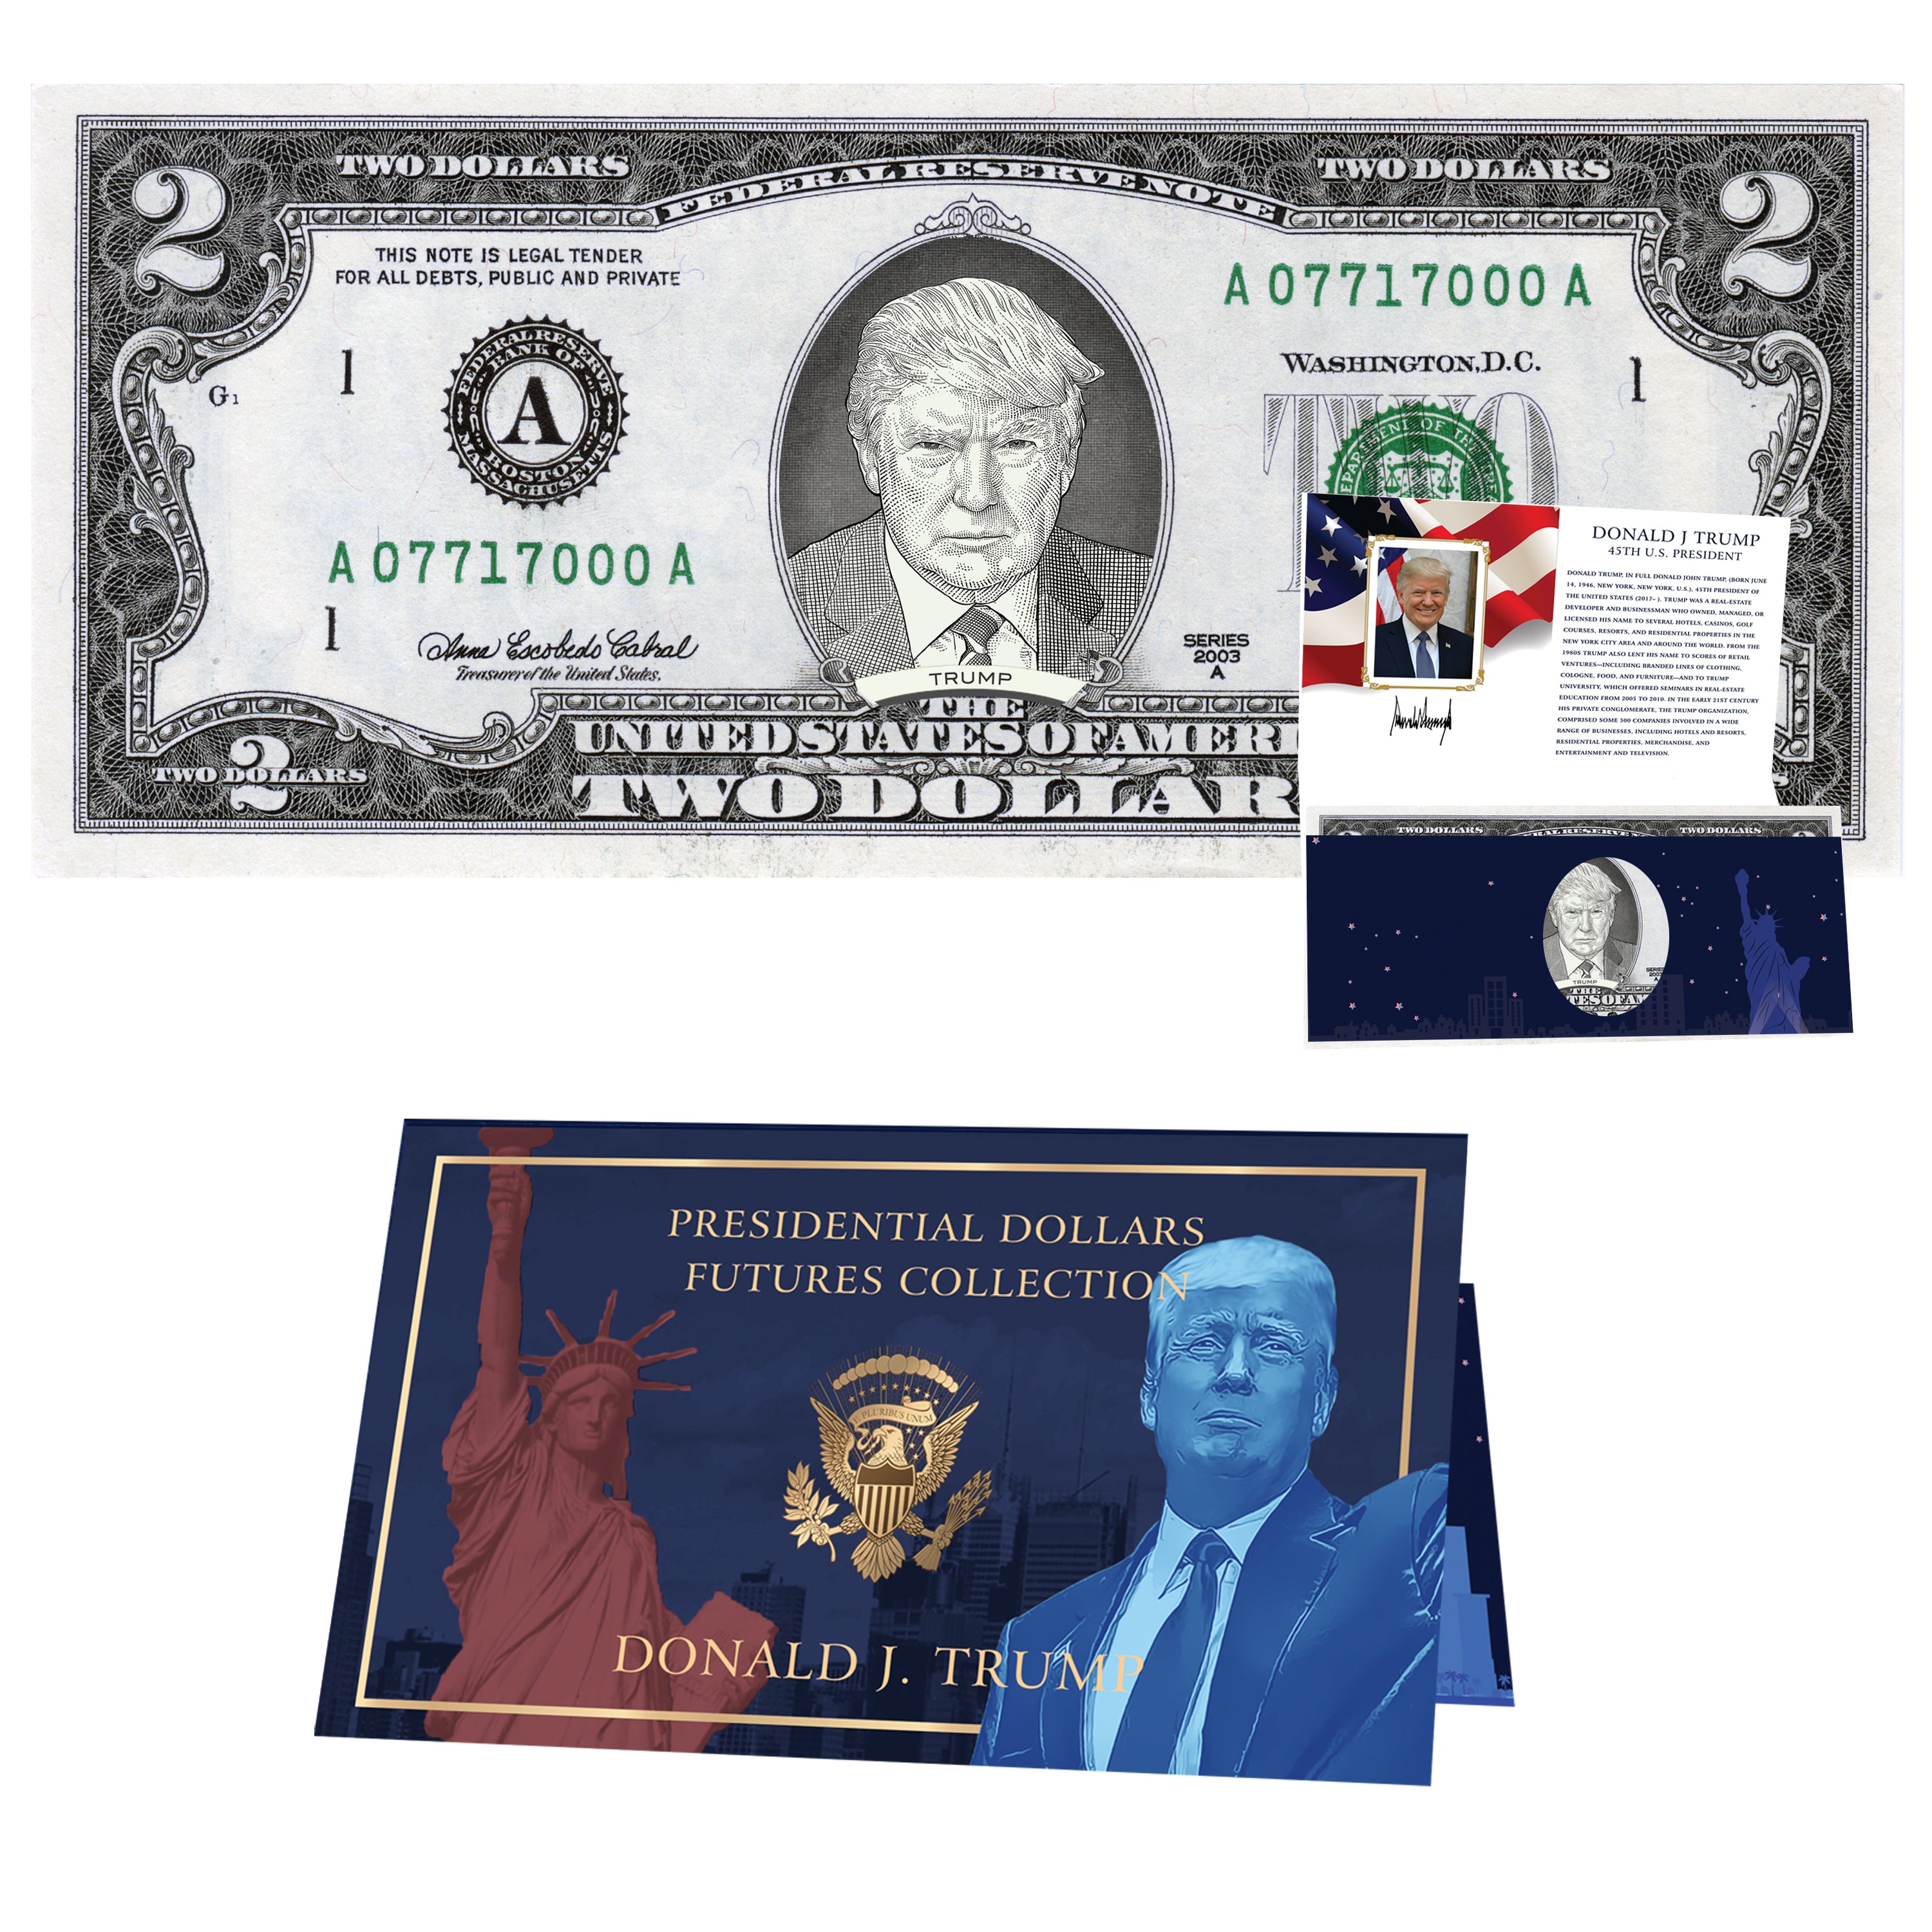 Donald Trump Official 2.0 Dollar Bill w/ Presidential Currency